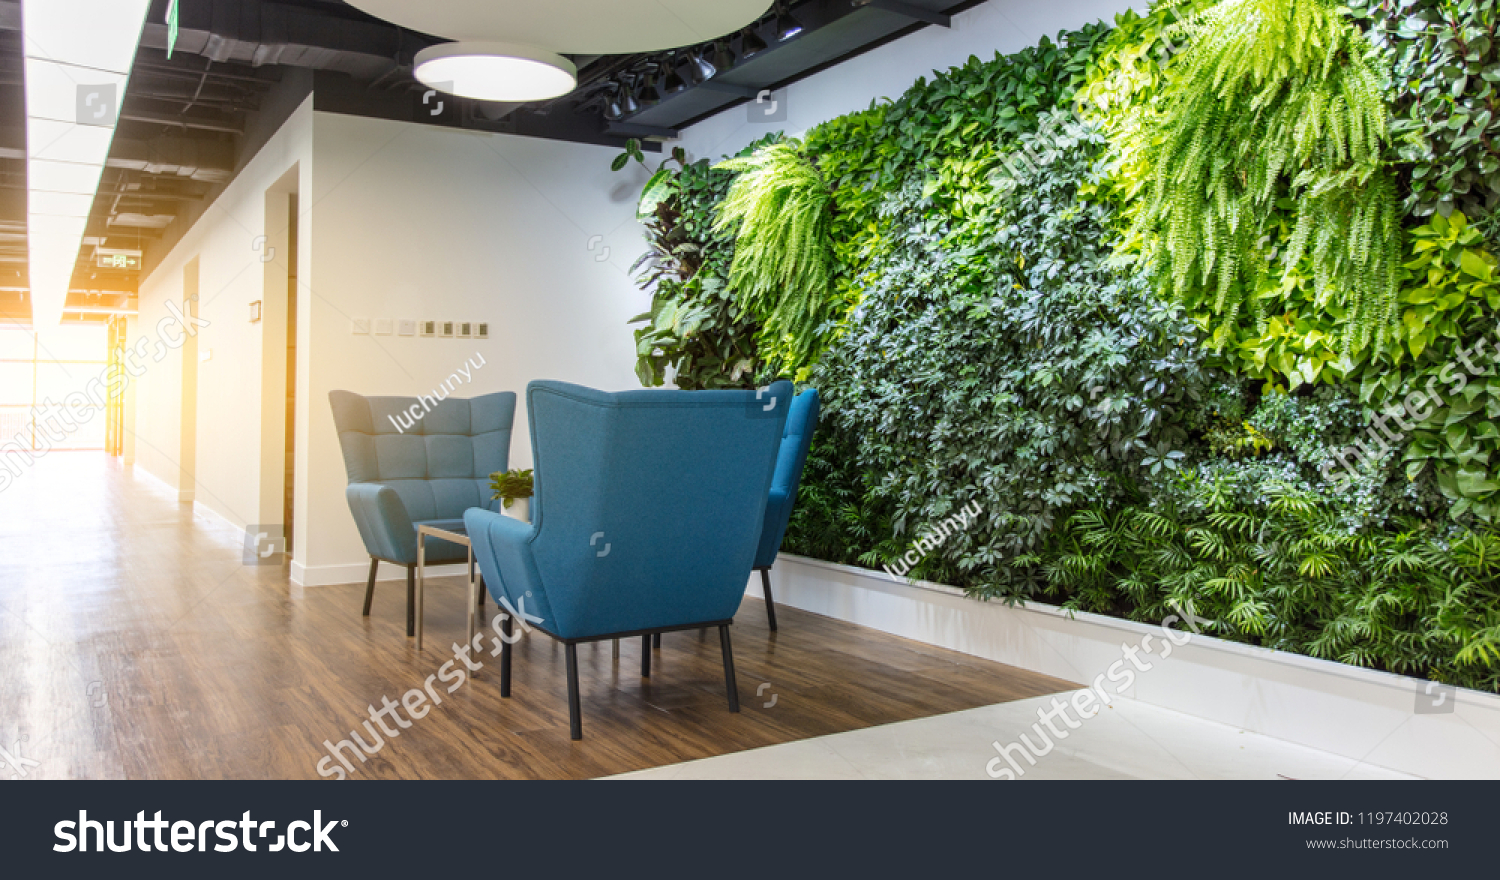 343,194 Office with plants Images, Stock Photos & Vectors | Shutterstock